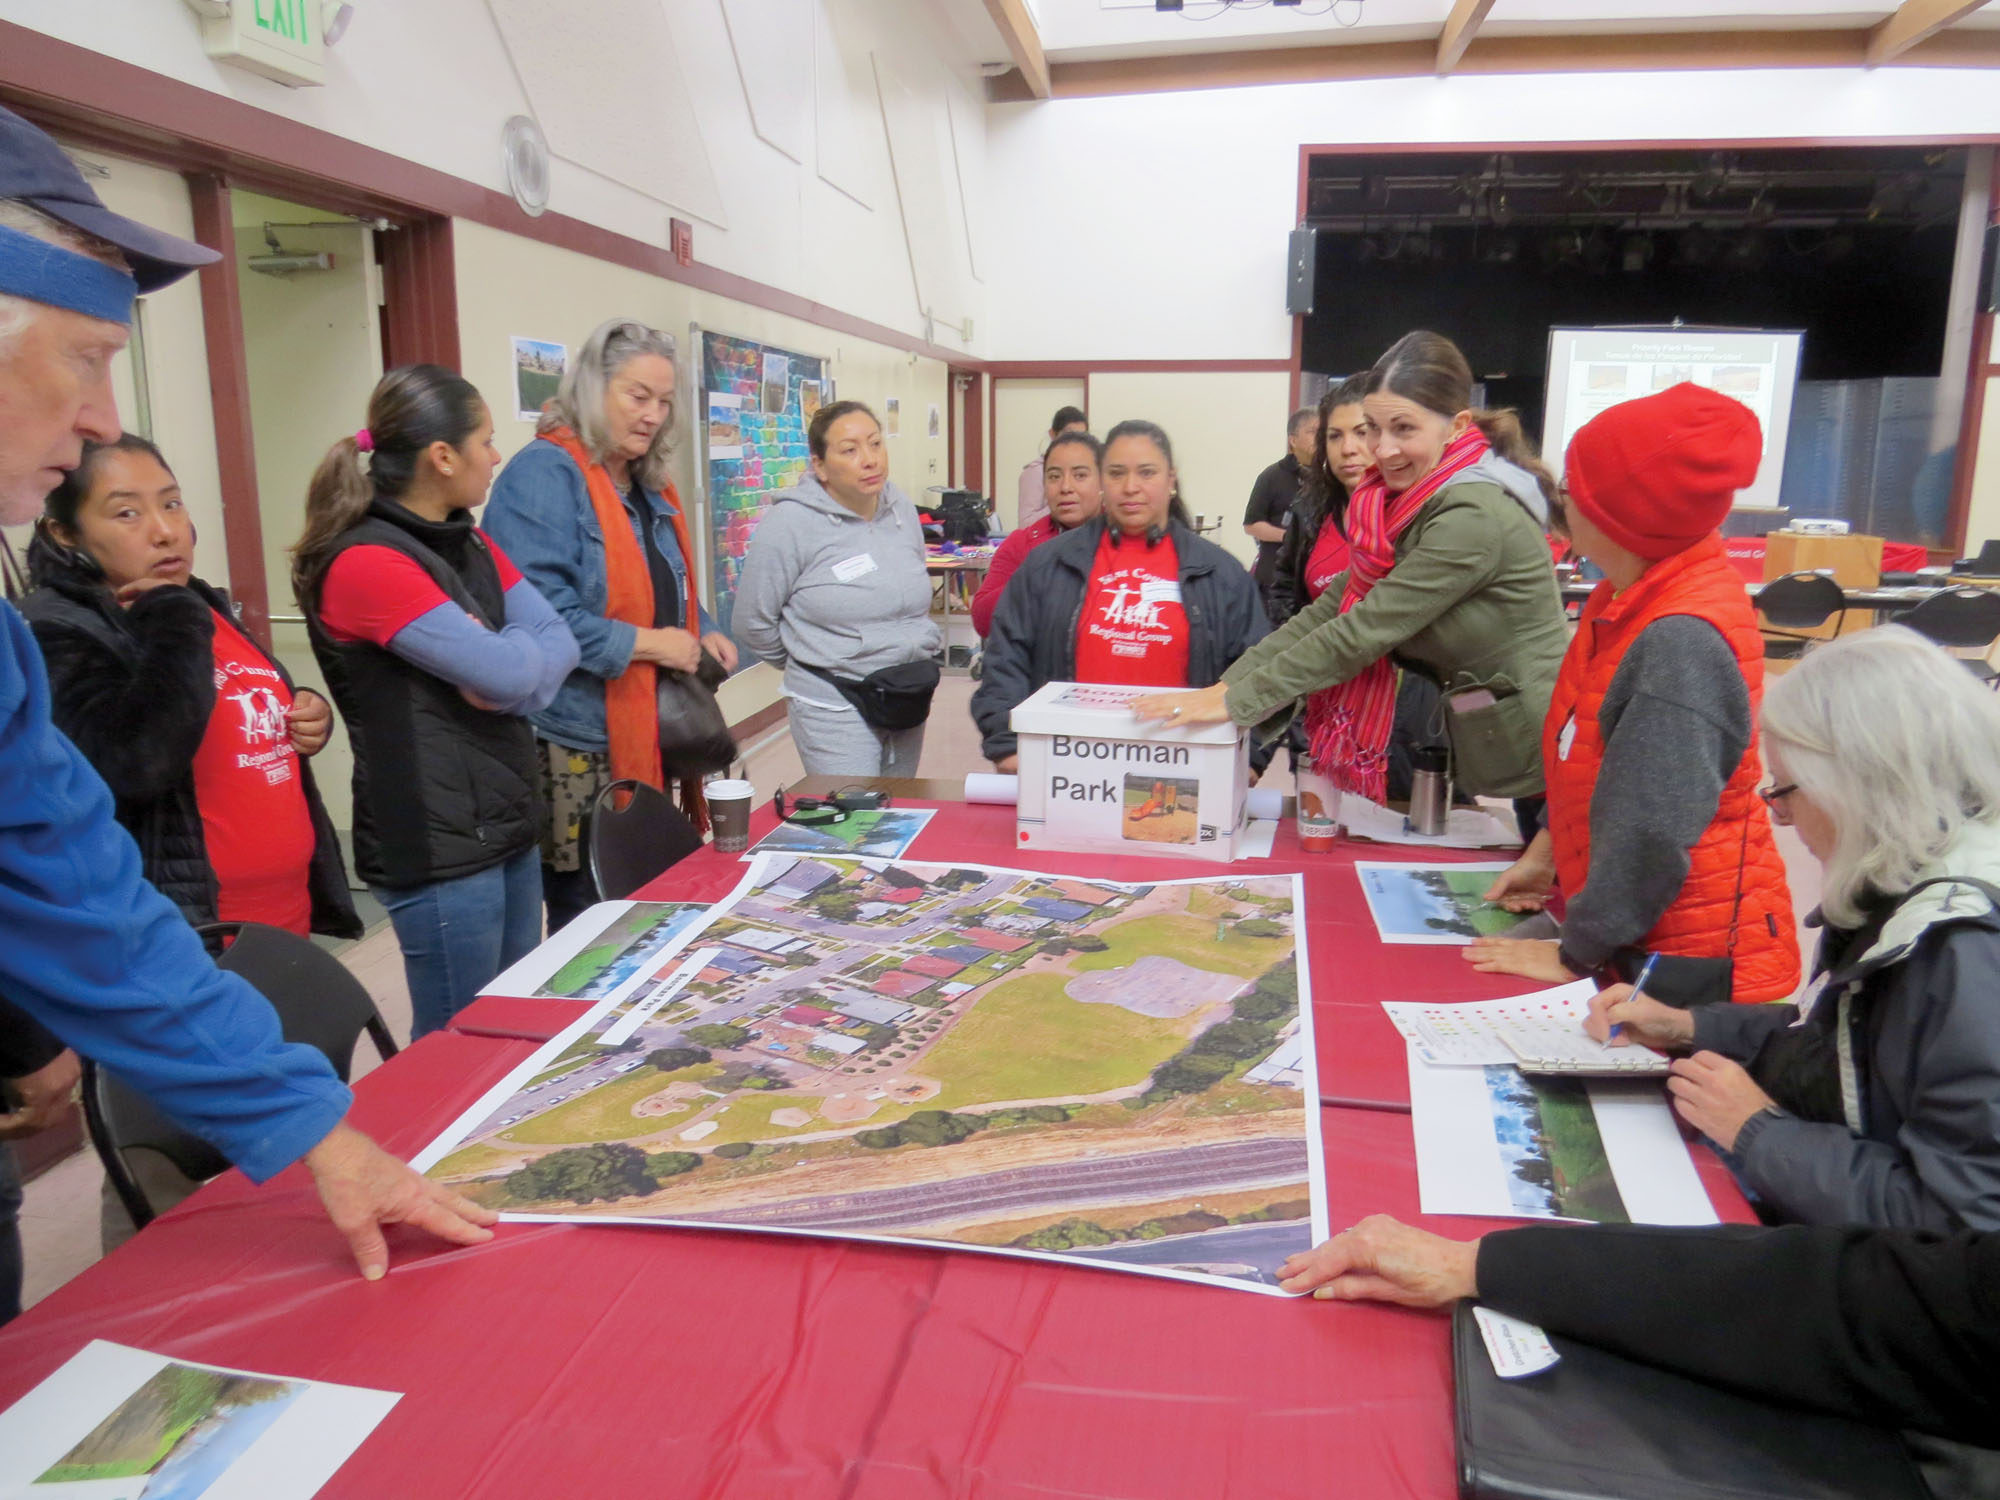 People standing arounda table reviewing and discussing a large printed aerial photograph map